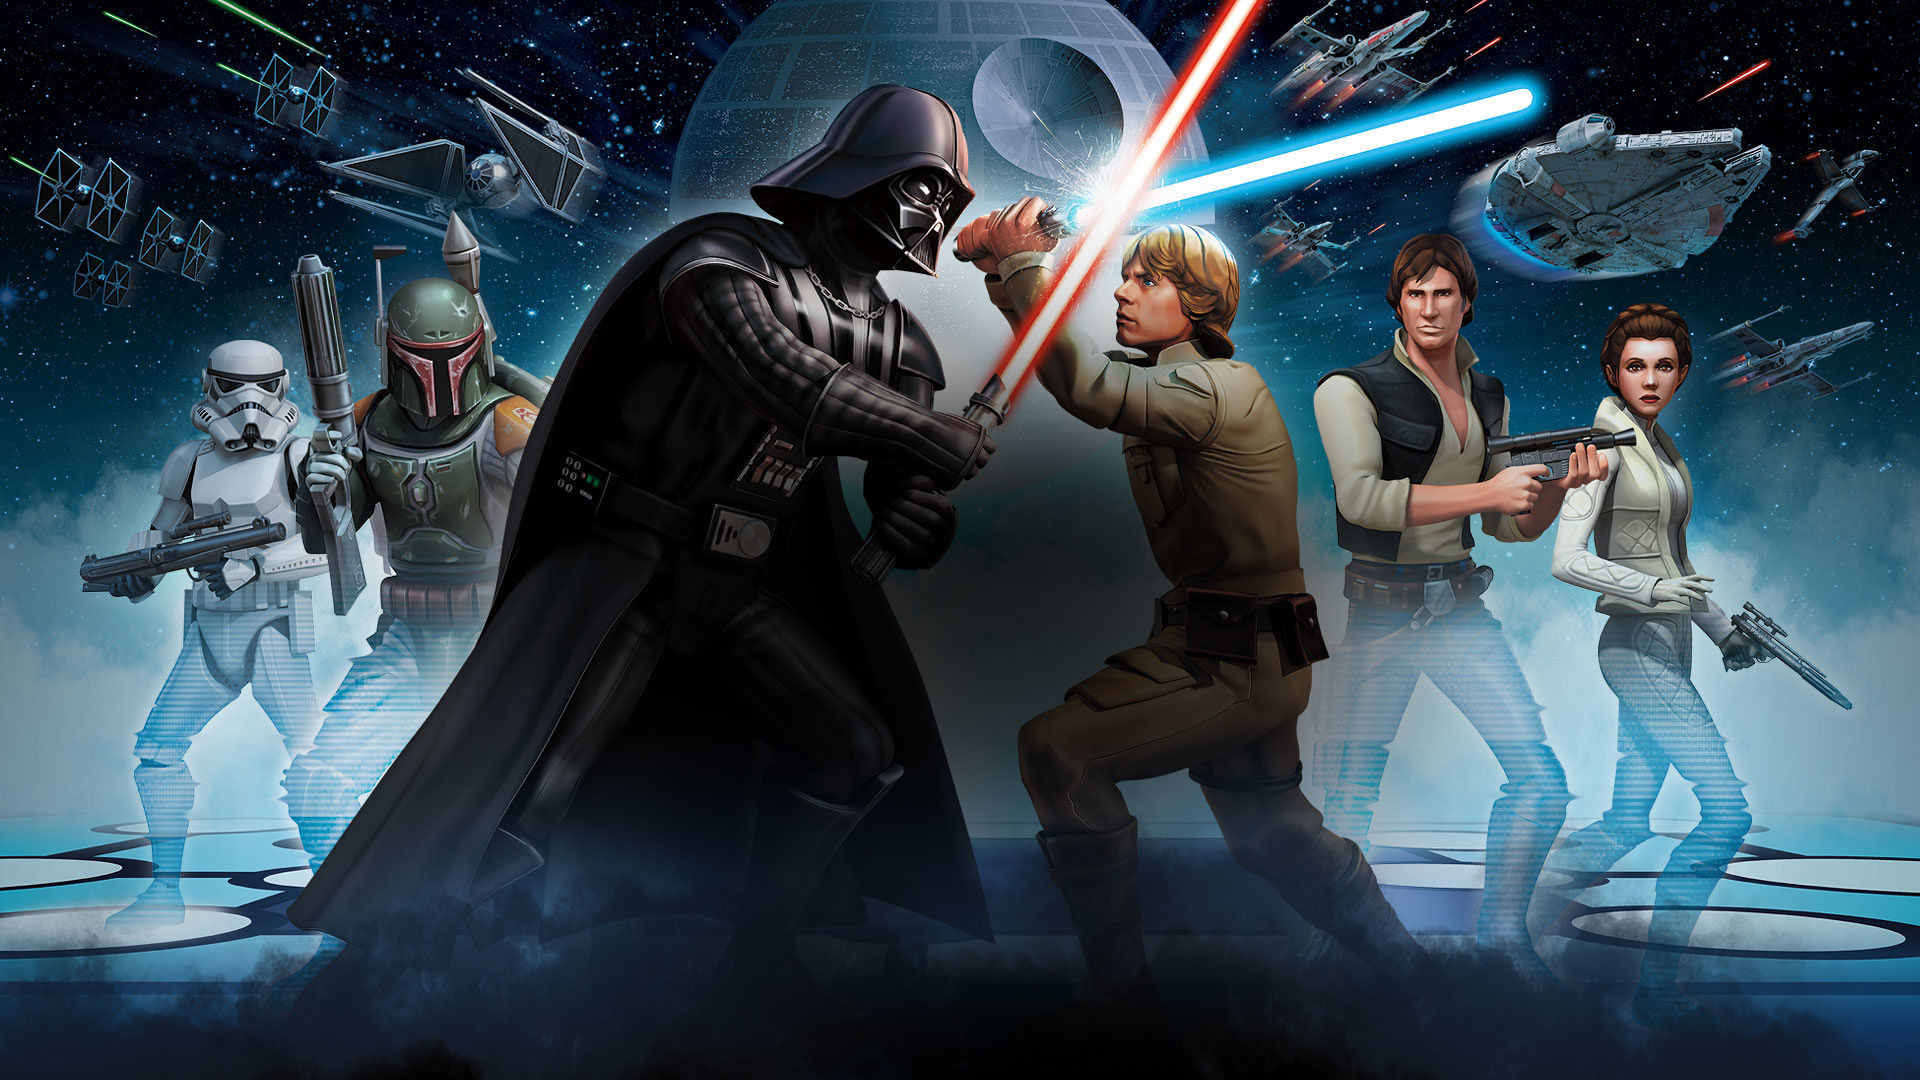 Star Wars Galaxy of Heroes gets Androidexclusive content ahead